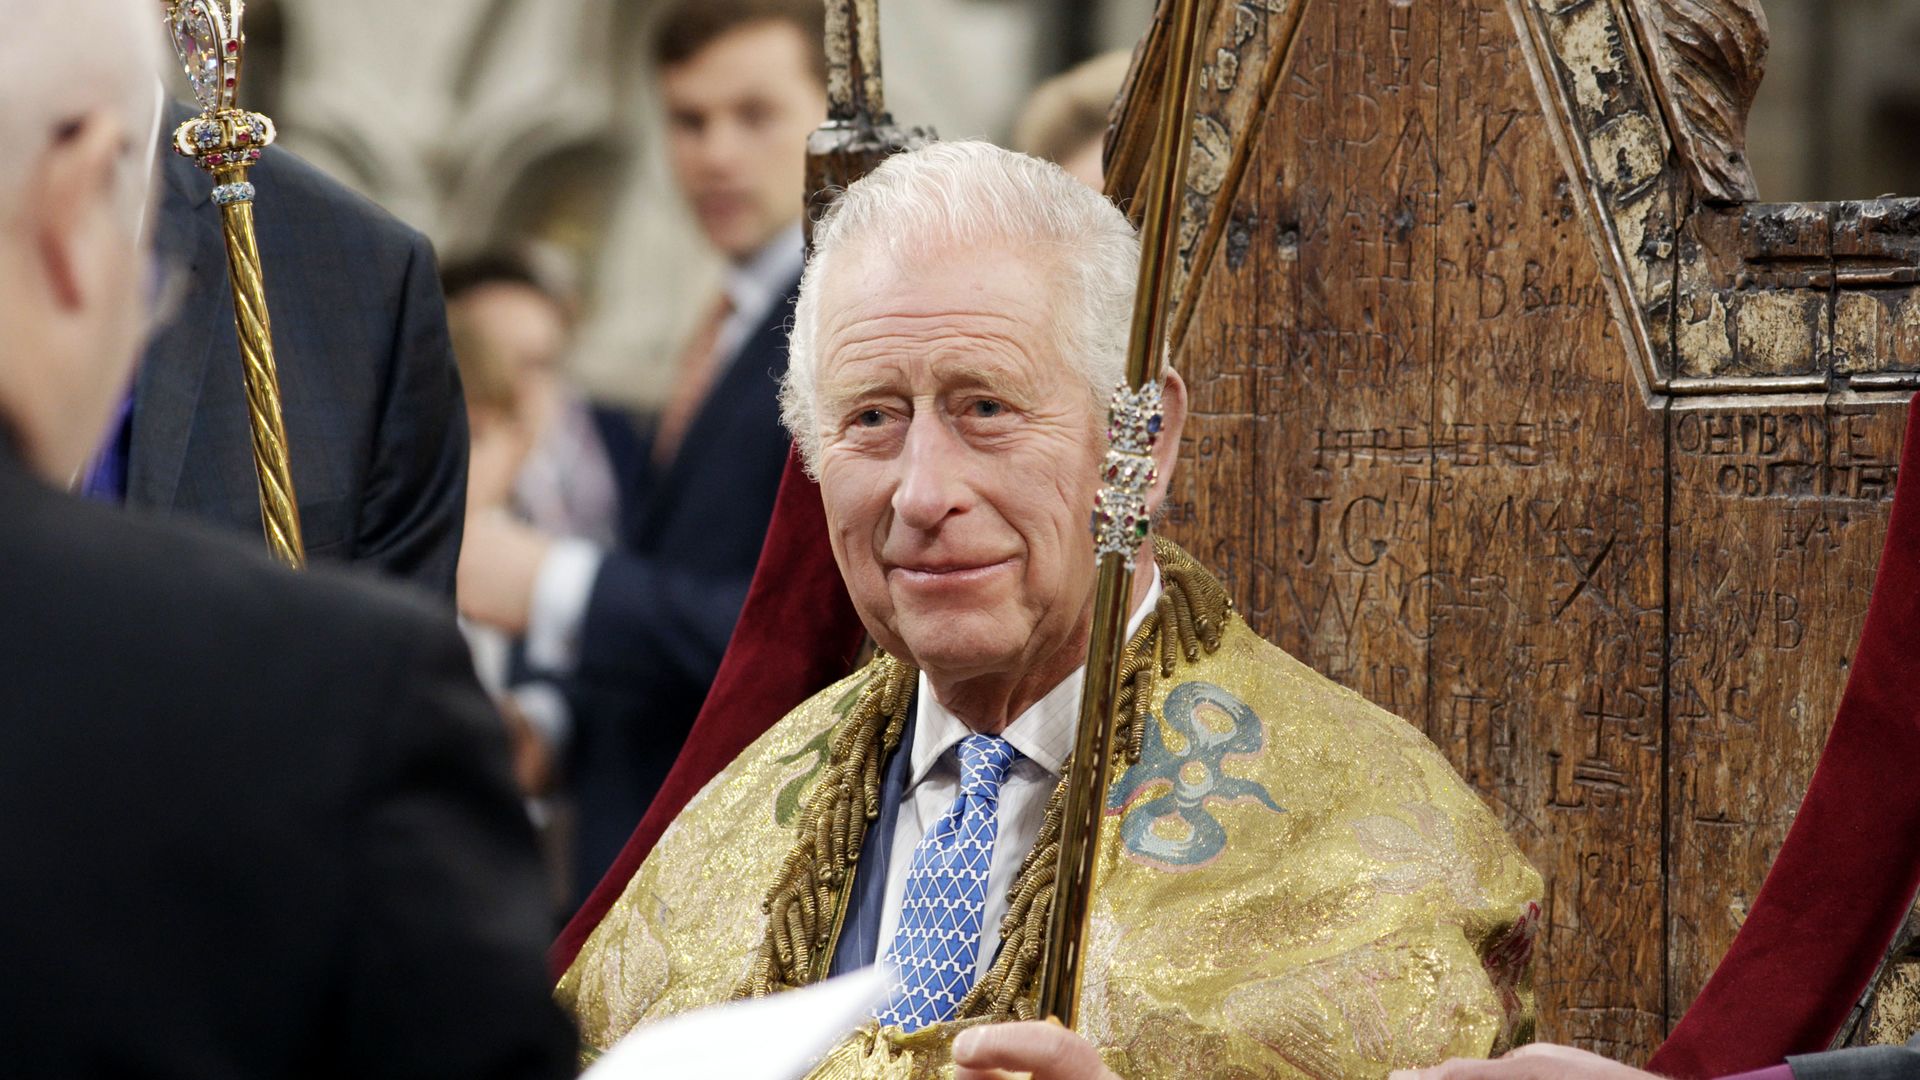 King Charles in a suit and tie and golden robe sat on wooden throne